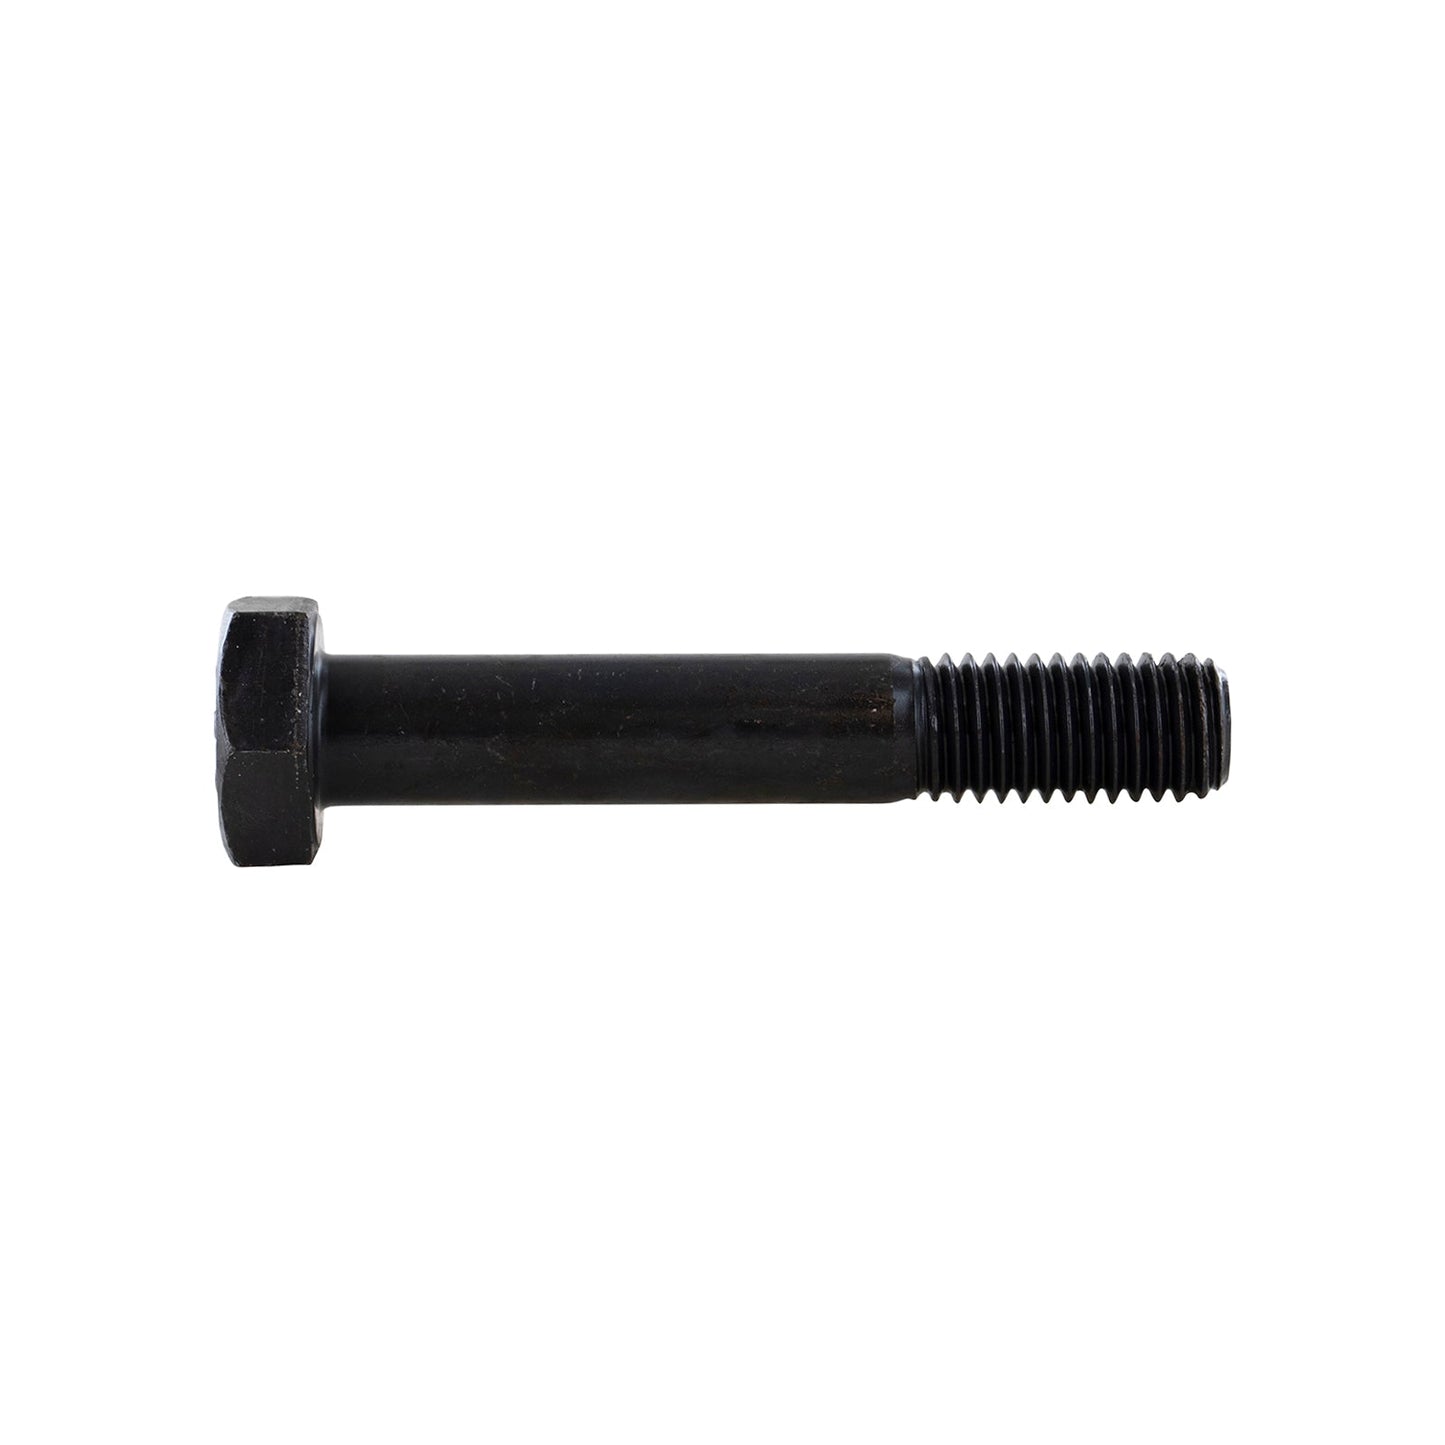 5/8-11 x 3-3/4 Conquest A325 Type 1 Heavy Hex Structural Bolt